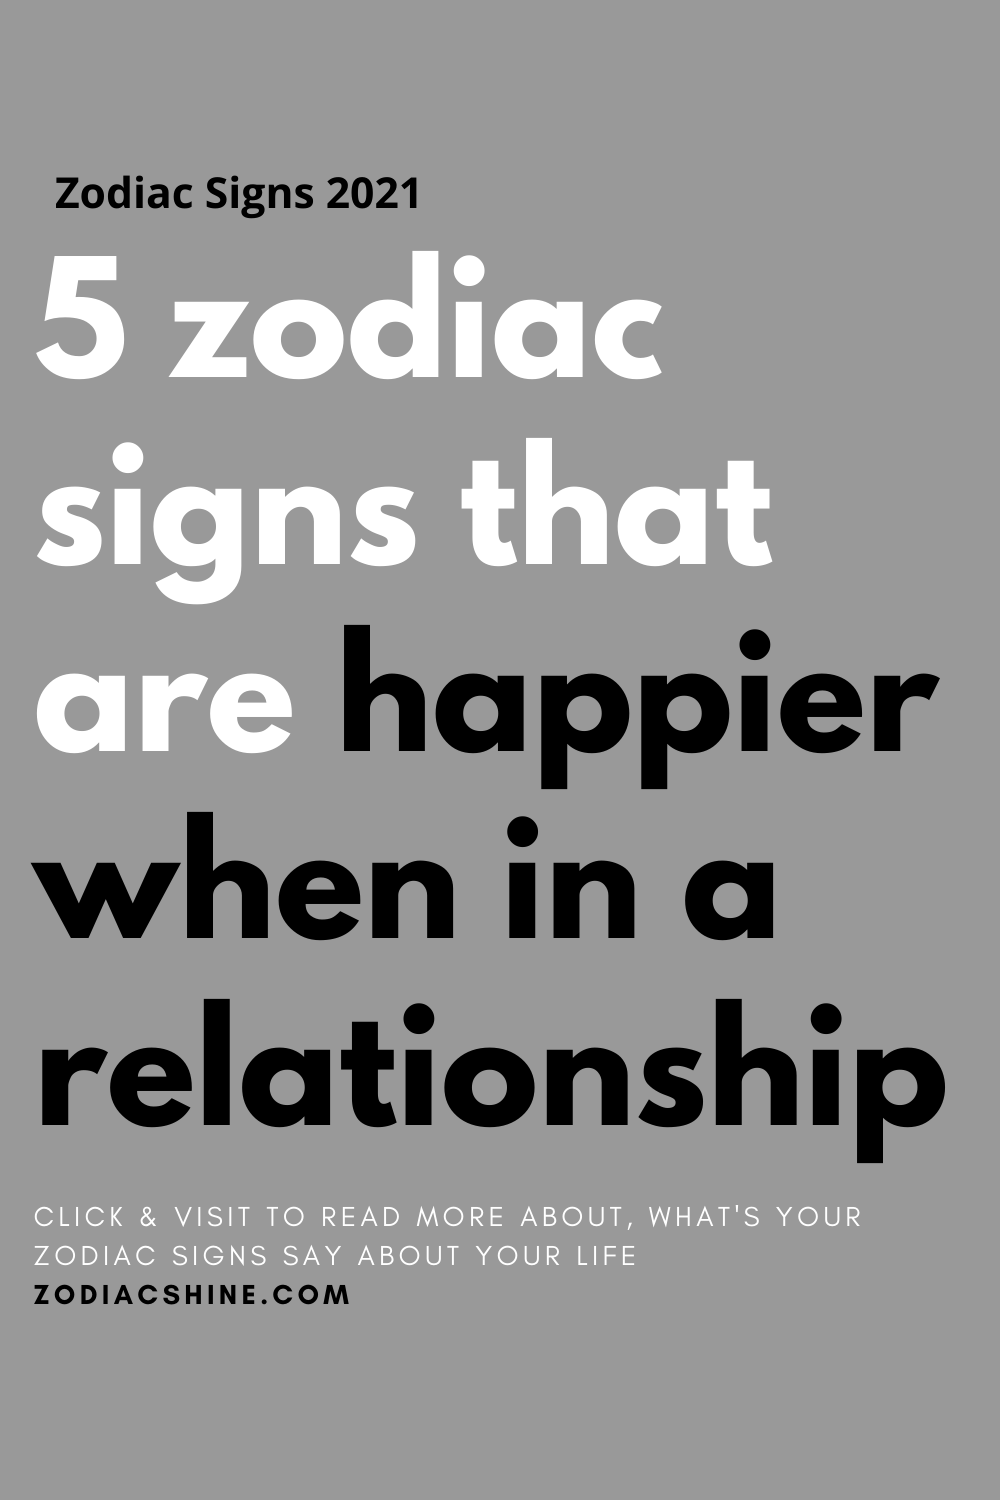 5 zodiac signs that are happier when in a relationship